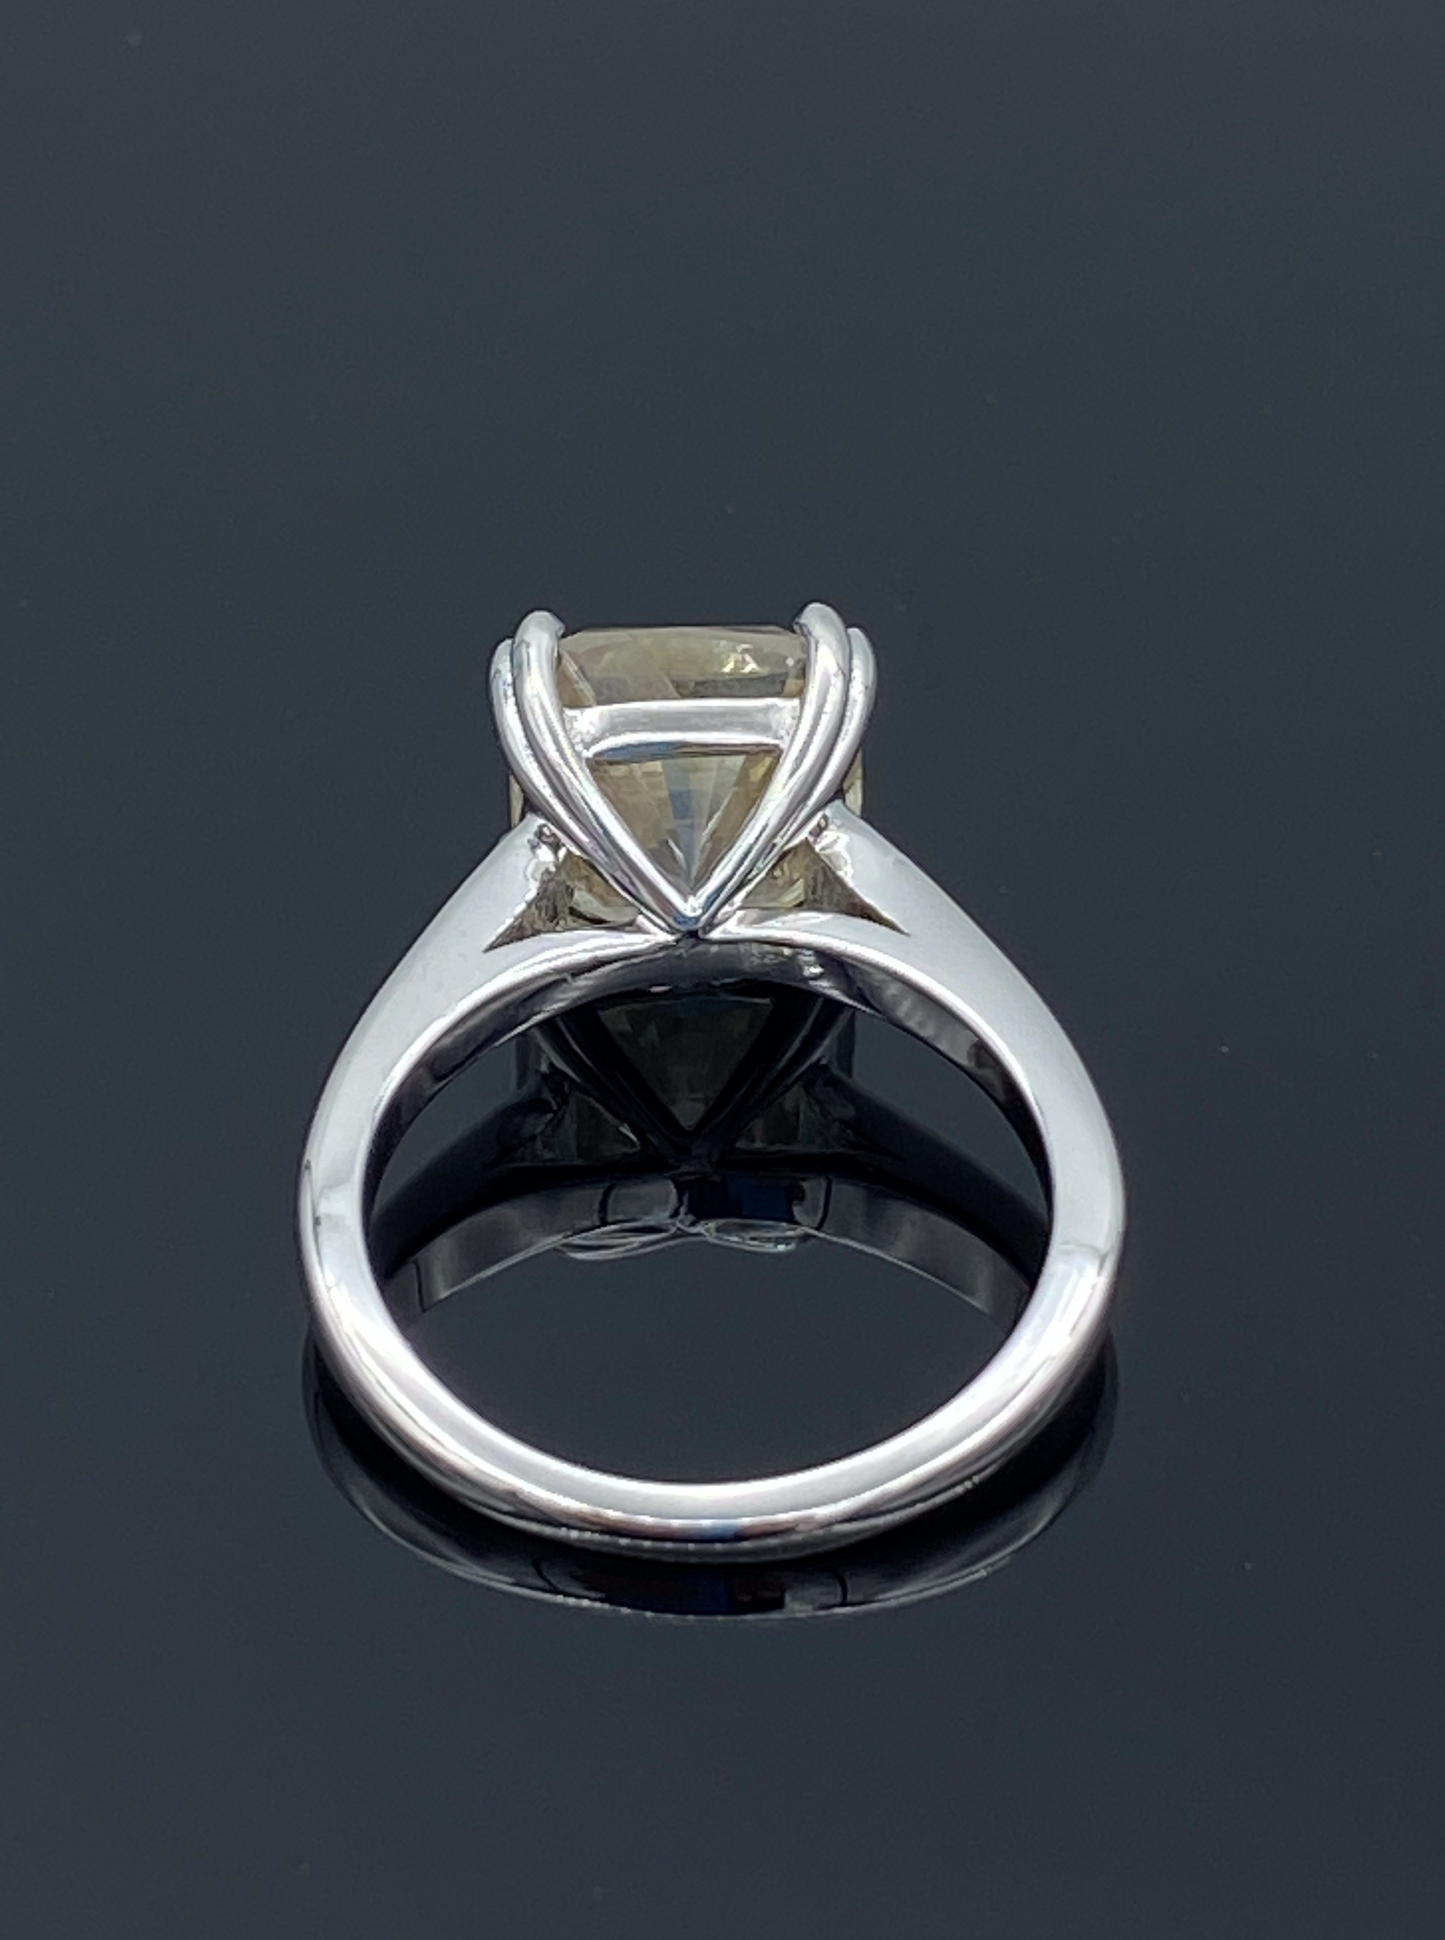 Solitaire Princess-Cut Diamond Engagement Ring in 14K White Gold - L and L Jewelry